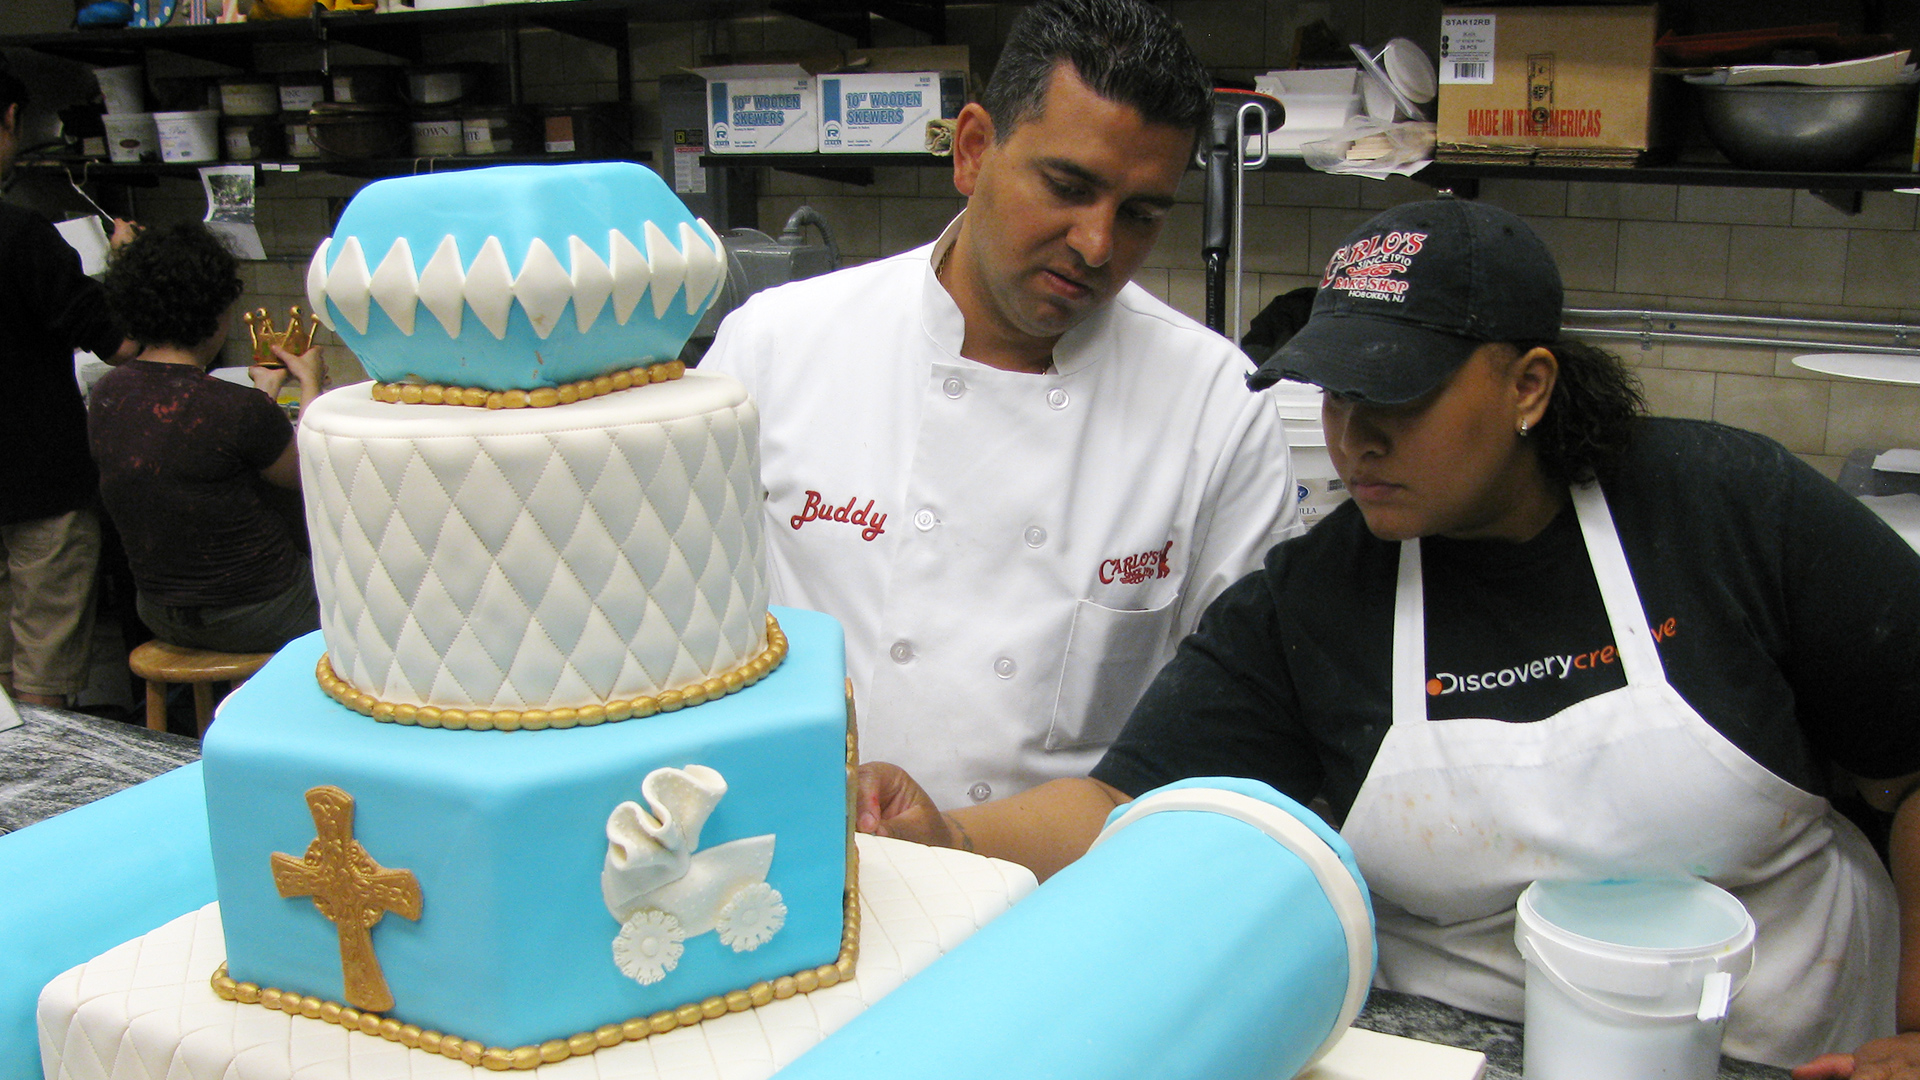 Watch Cake Boss Season 3 Episode 9 - A Princess, a Pirate and a Perplexing  Arch Online Now